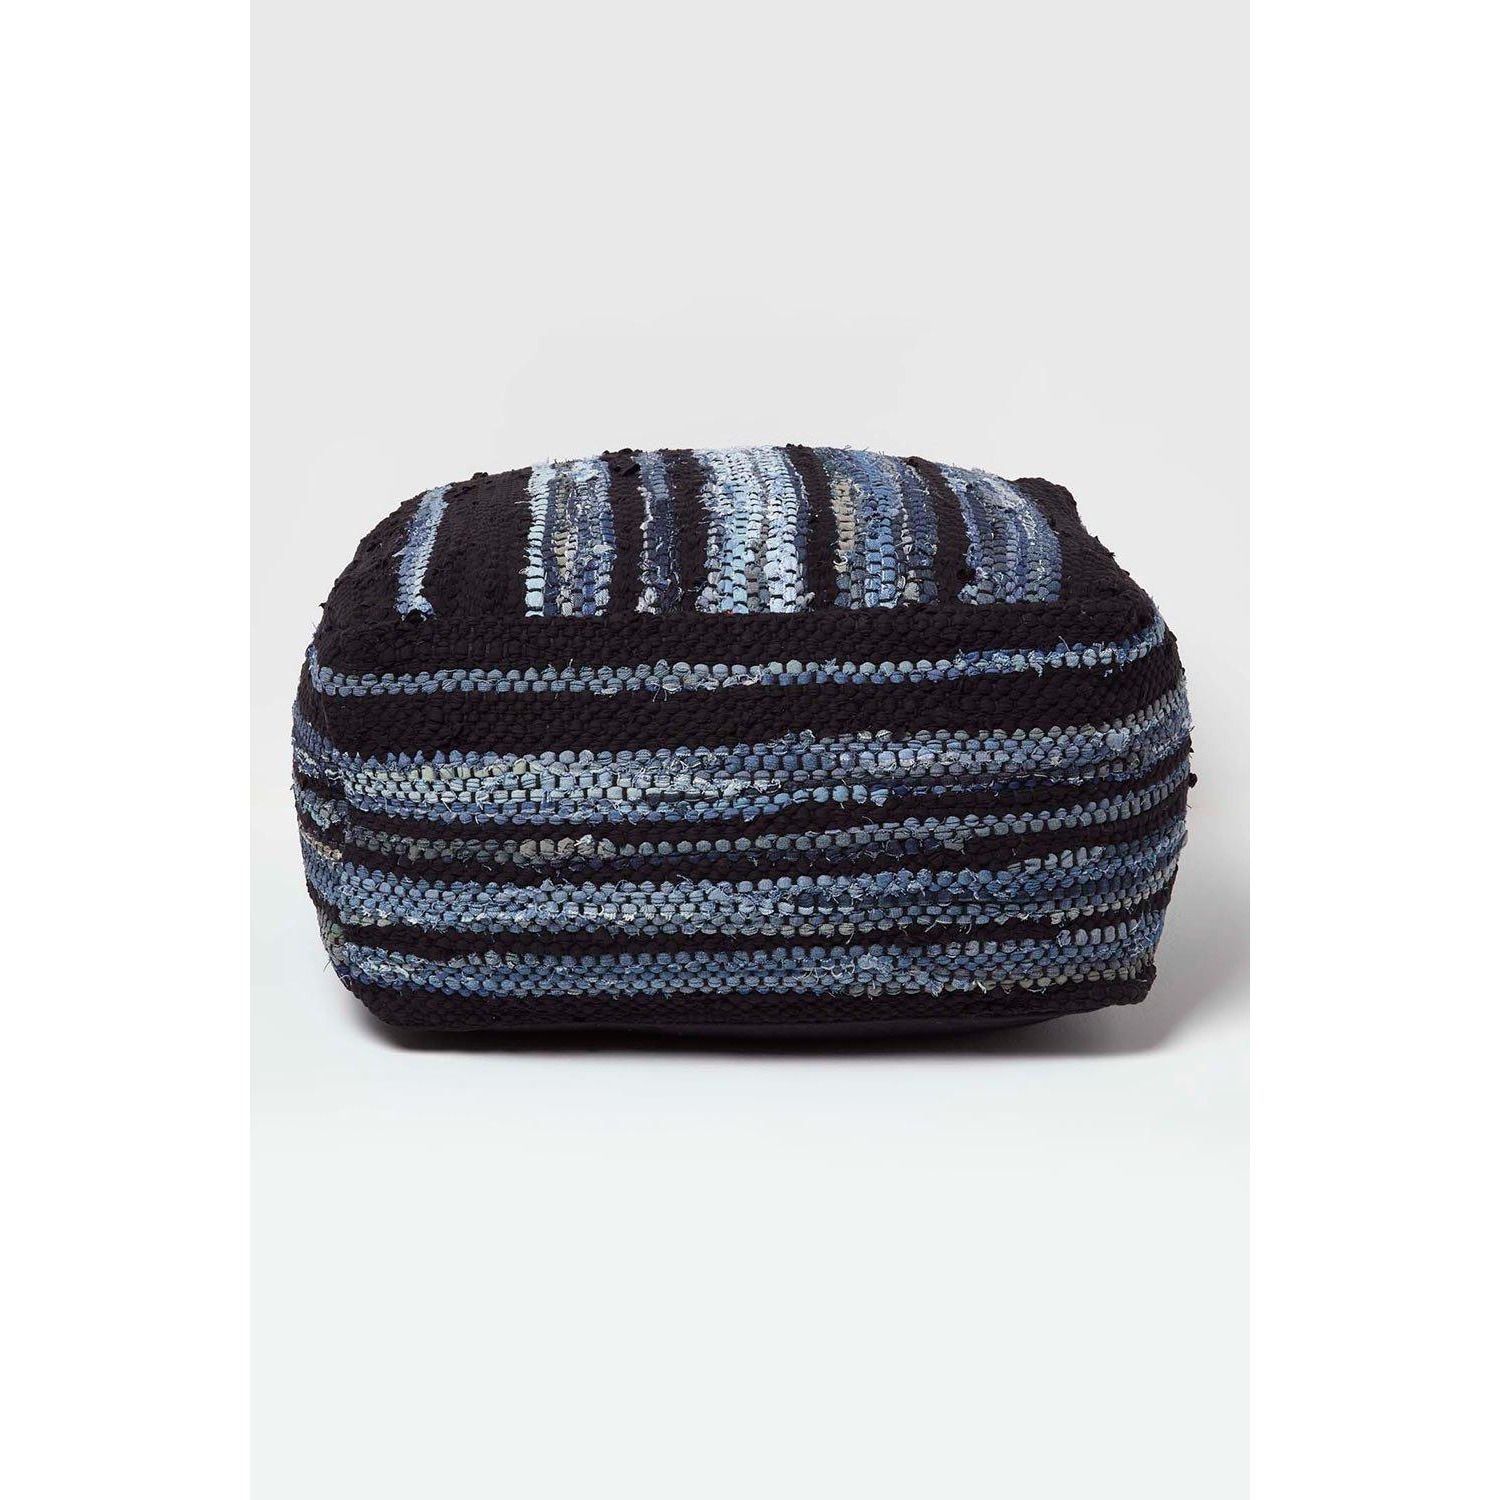 Texas Leather, Denim Woven Striped Bean Filled Pouffe, 60 cm - image 1